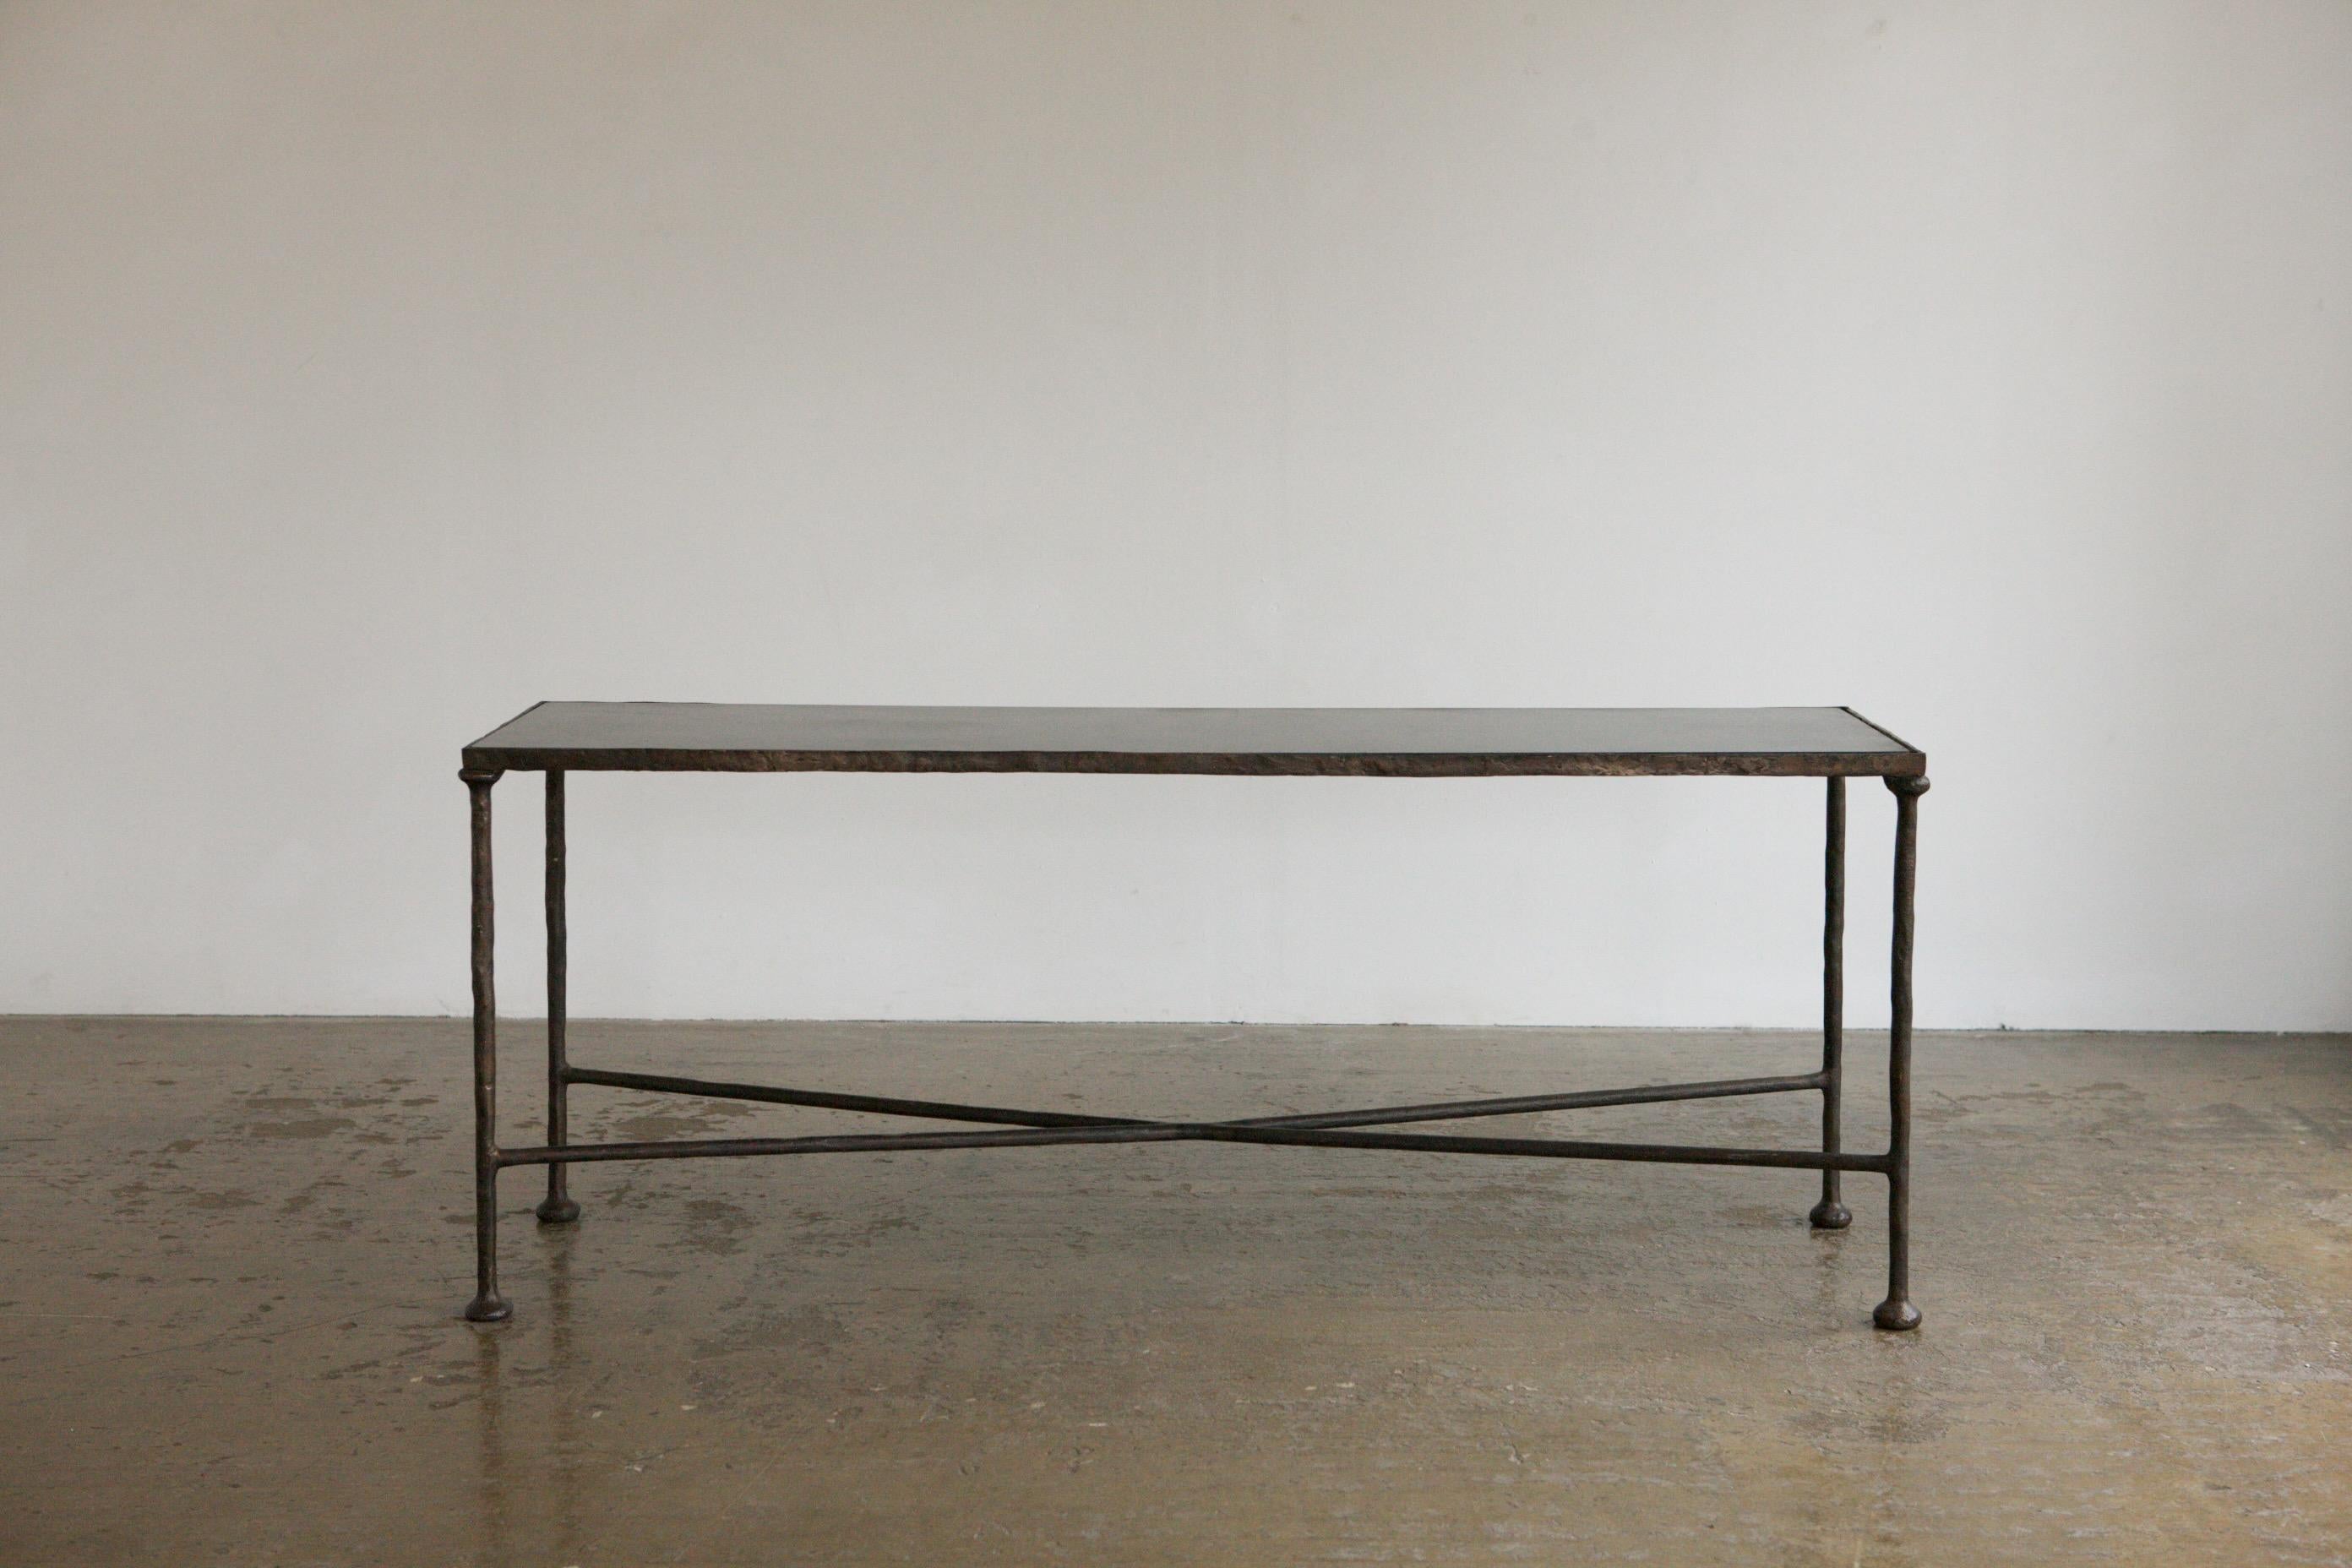 An absolutely incredible console in solid bronze with a black steel table top. The table which has had a steel top inserted is made in the matter of the work of Diego Giacometti, brother of Alberto Giacometti. Work in bronze is highly collectable.